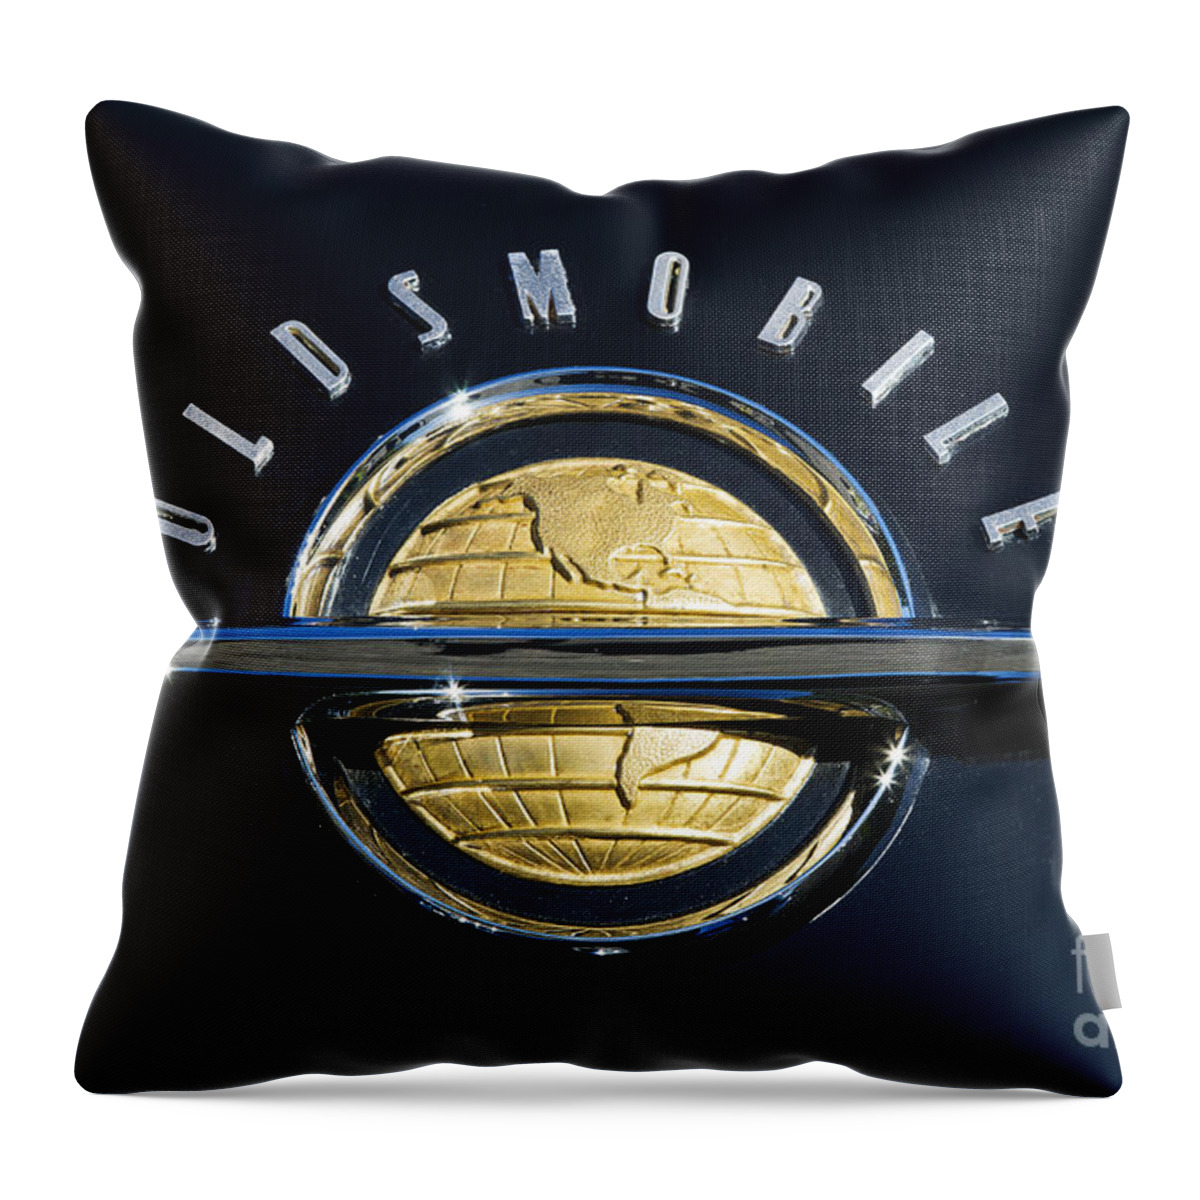 1951 Oldsmobile Throw Pillow featuring the photograph Oldsmobile by Dennis Hedberg